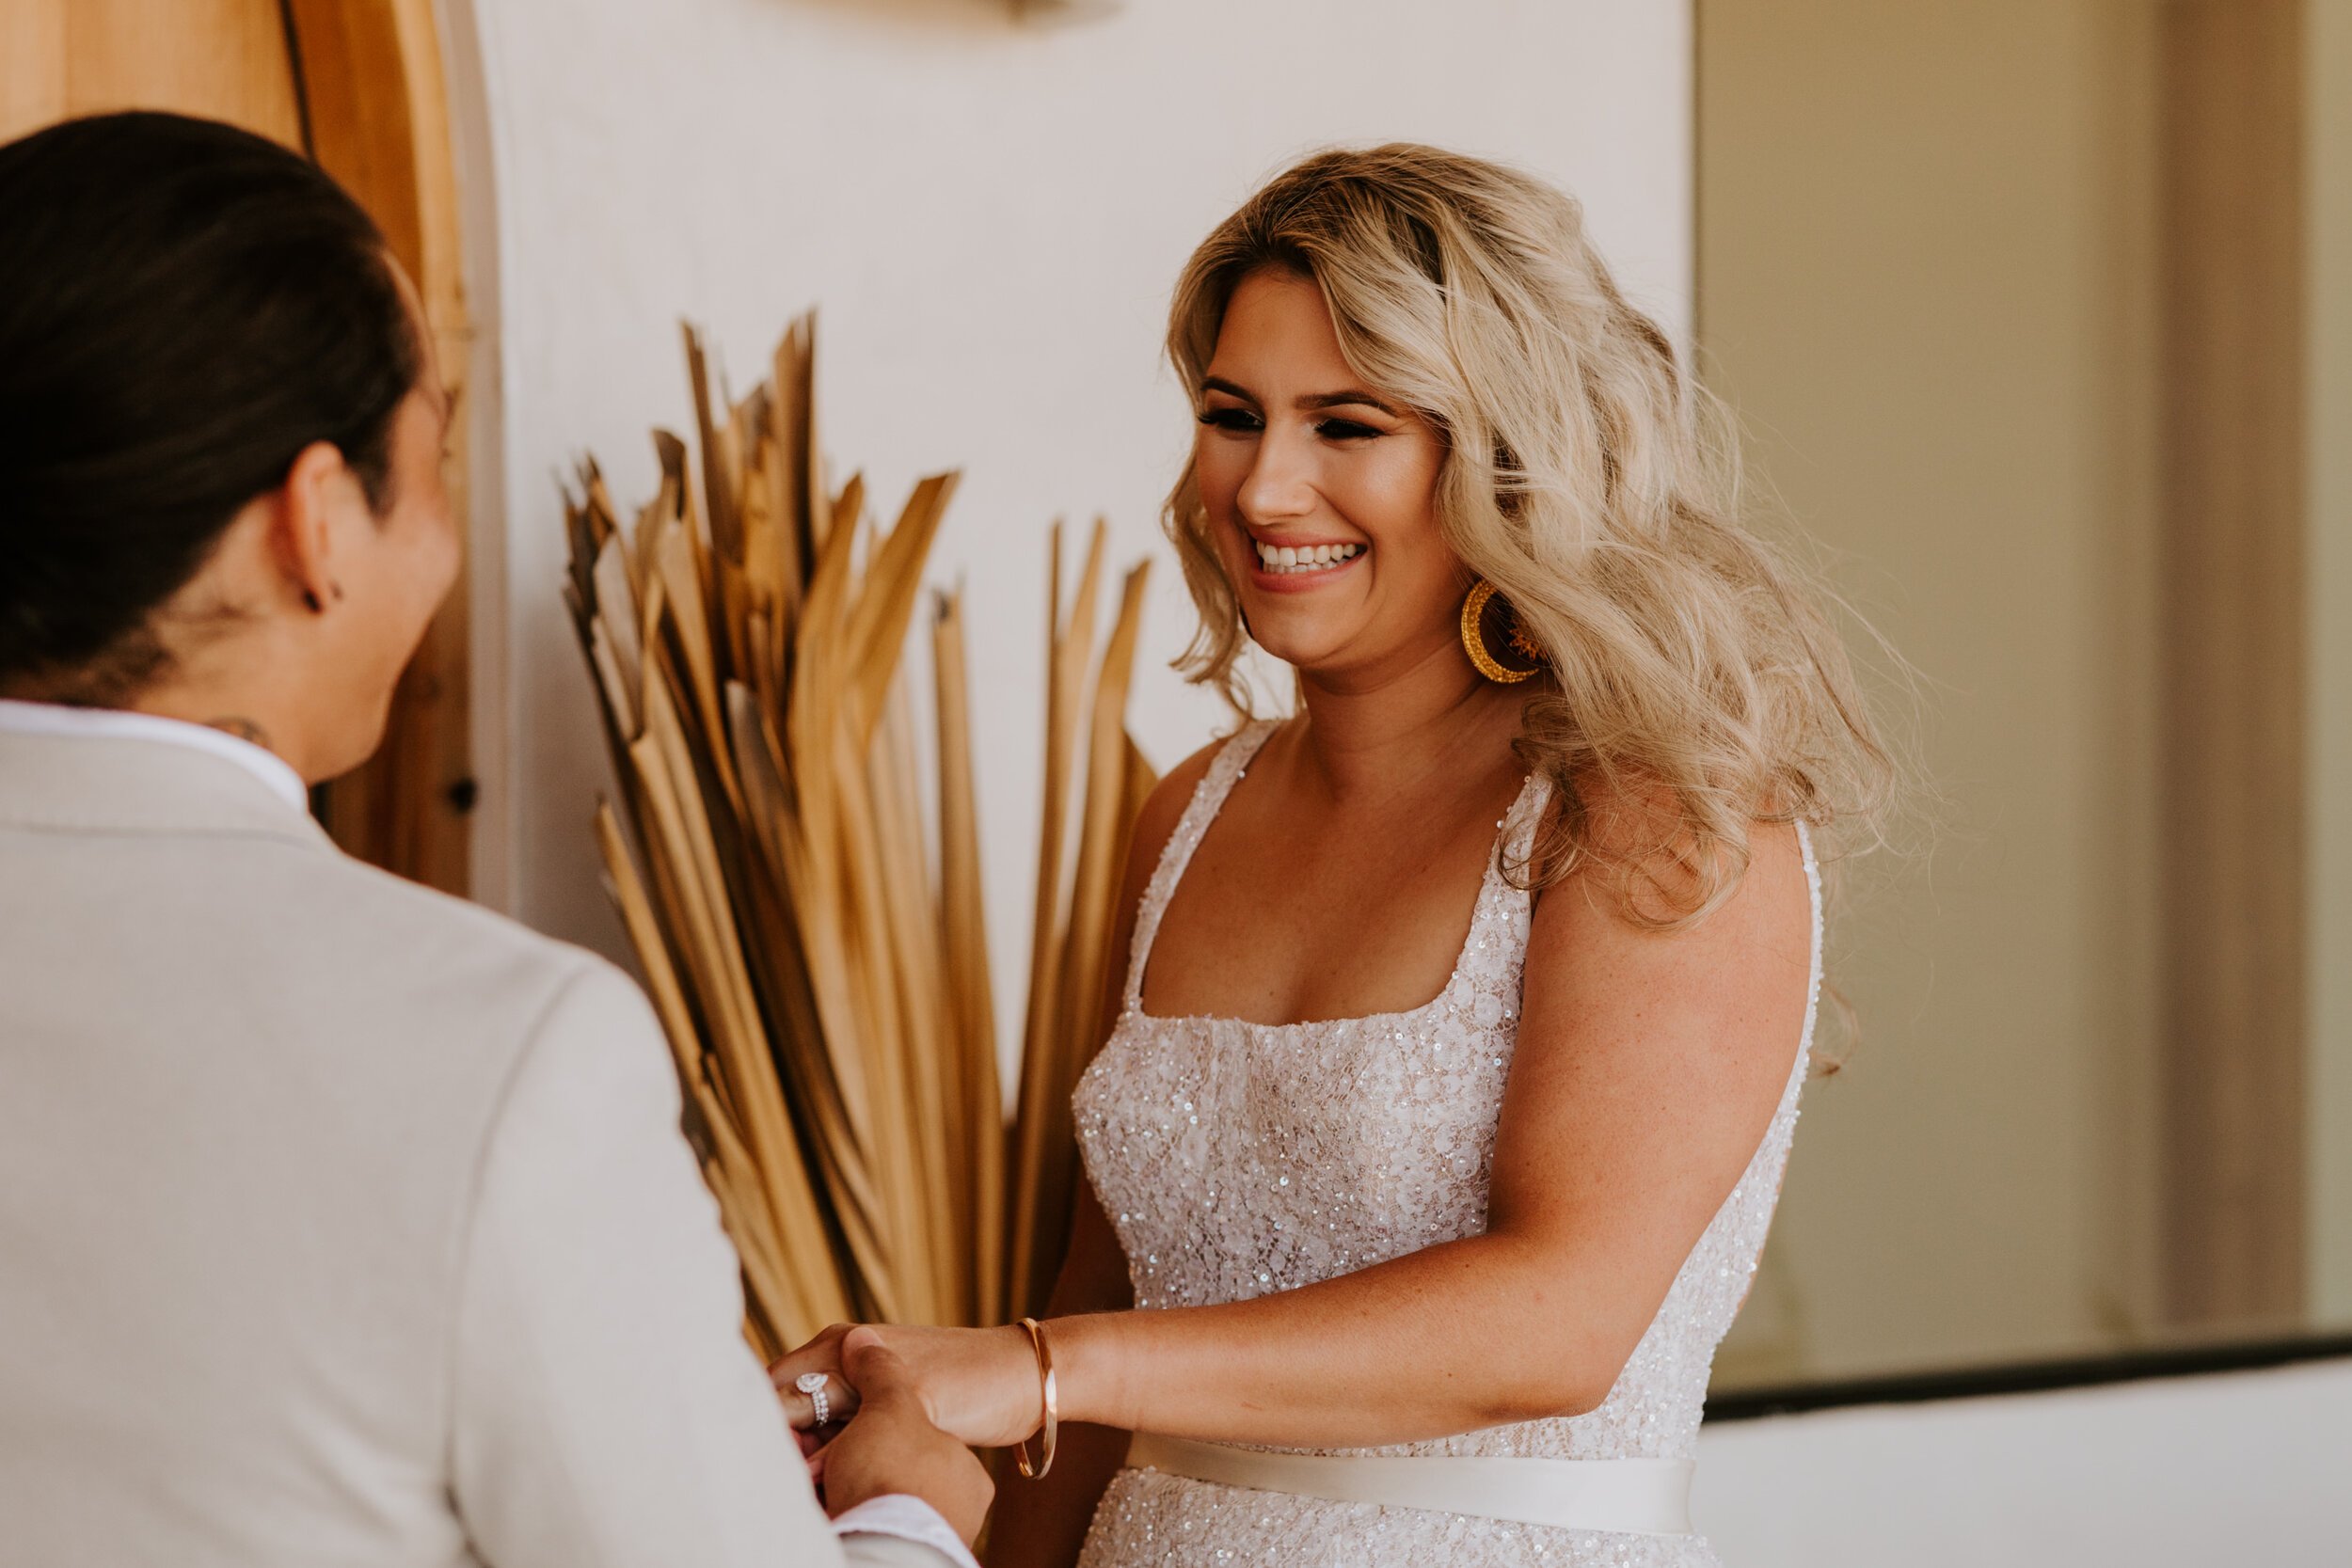 Joshua Tree Elopement at Desert Wild Airbnb | Boho neutral and rust color palette | Tida Svy | www.tidasvy.com